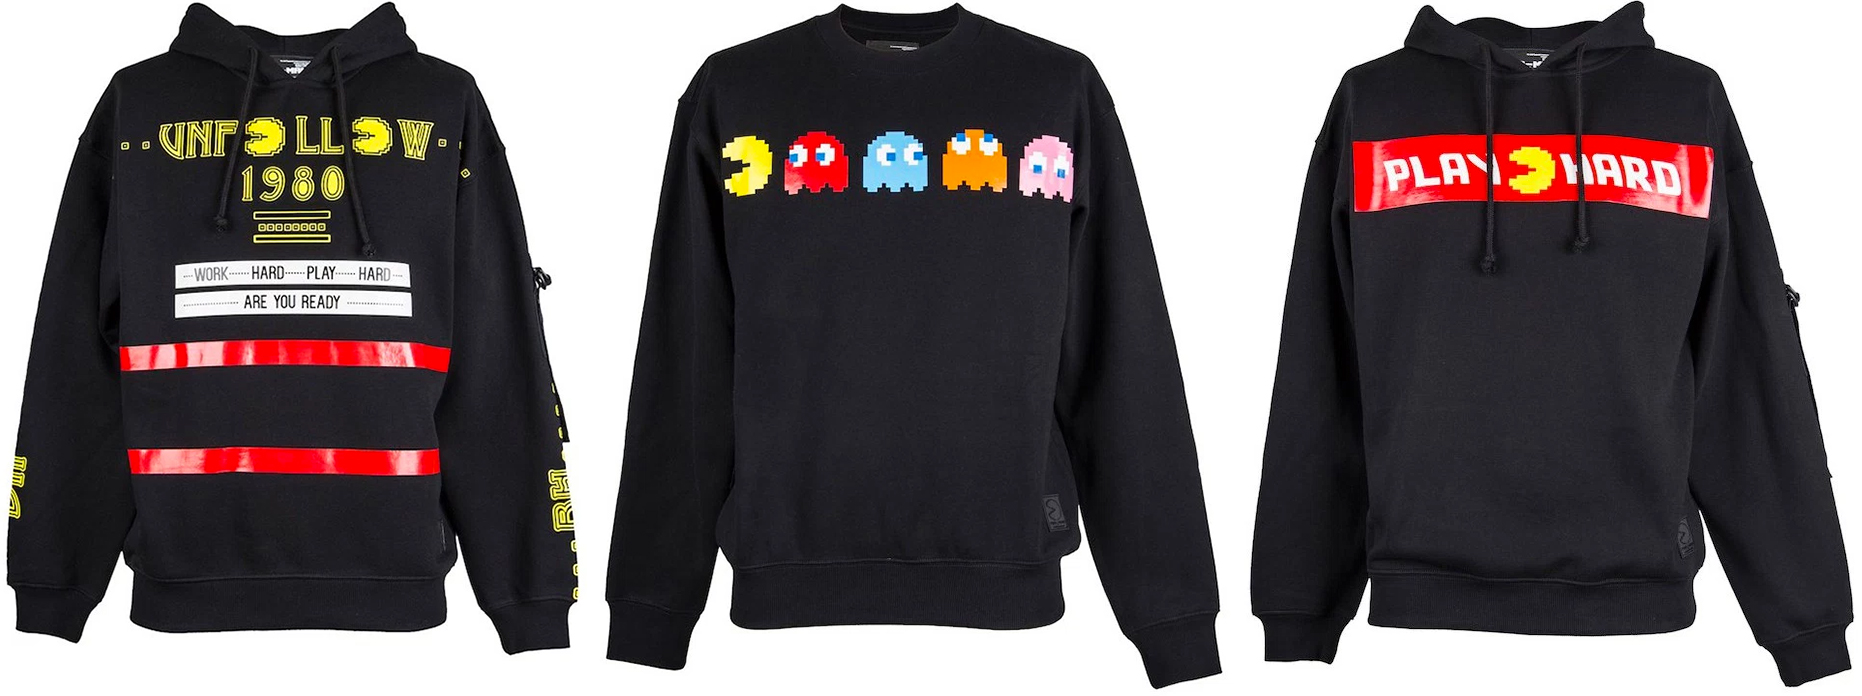 Pac-Man Bomber Jacket Will Remind People of All Those Ghost Battles You Fought